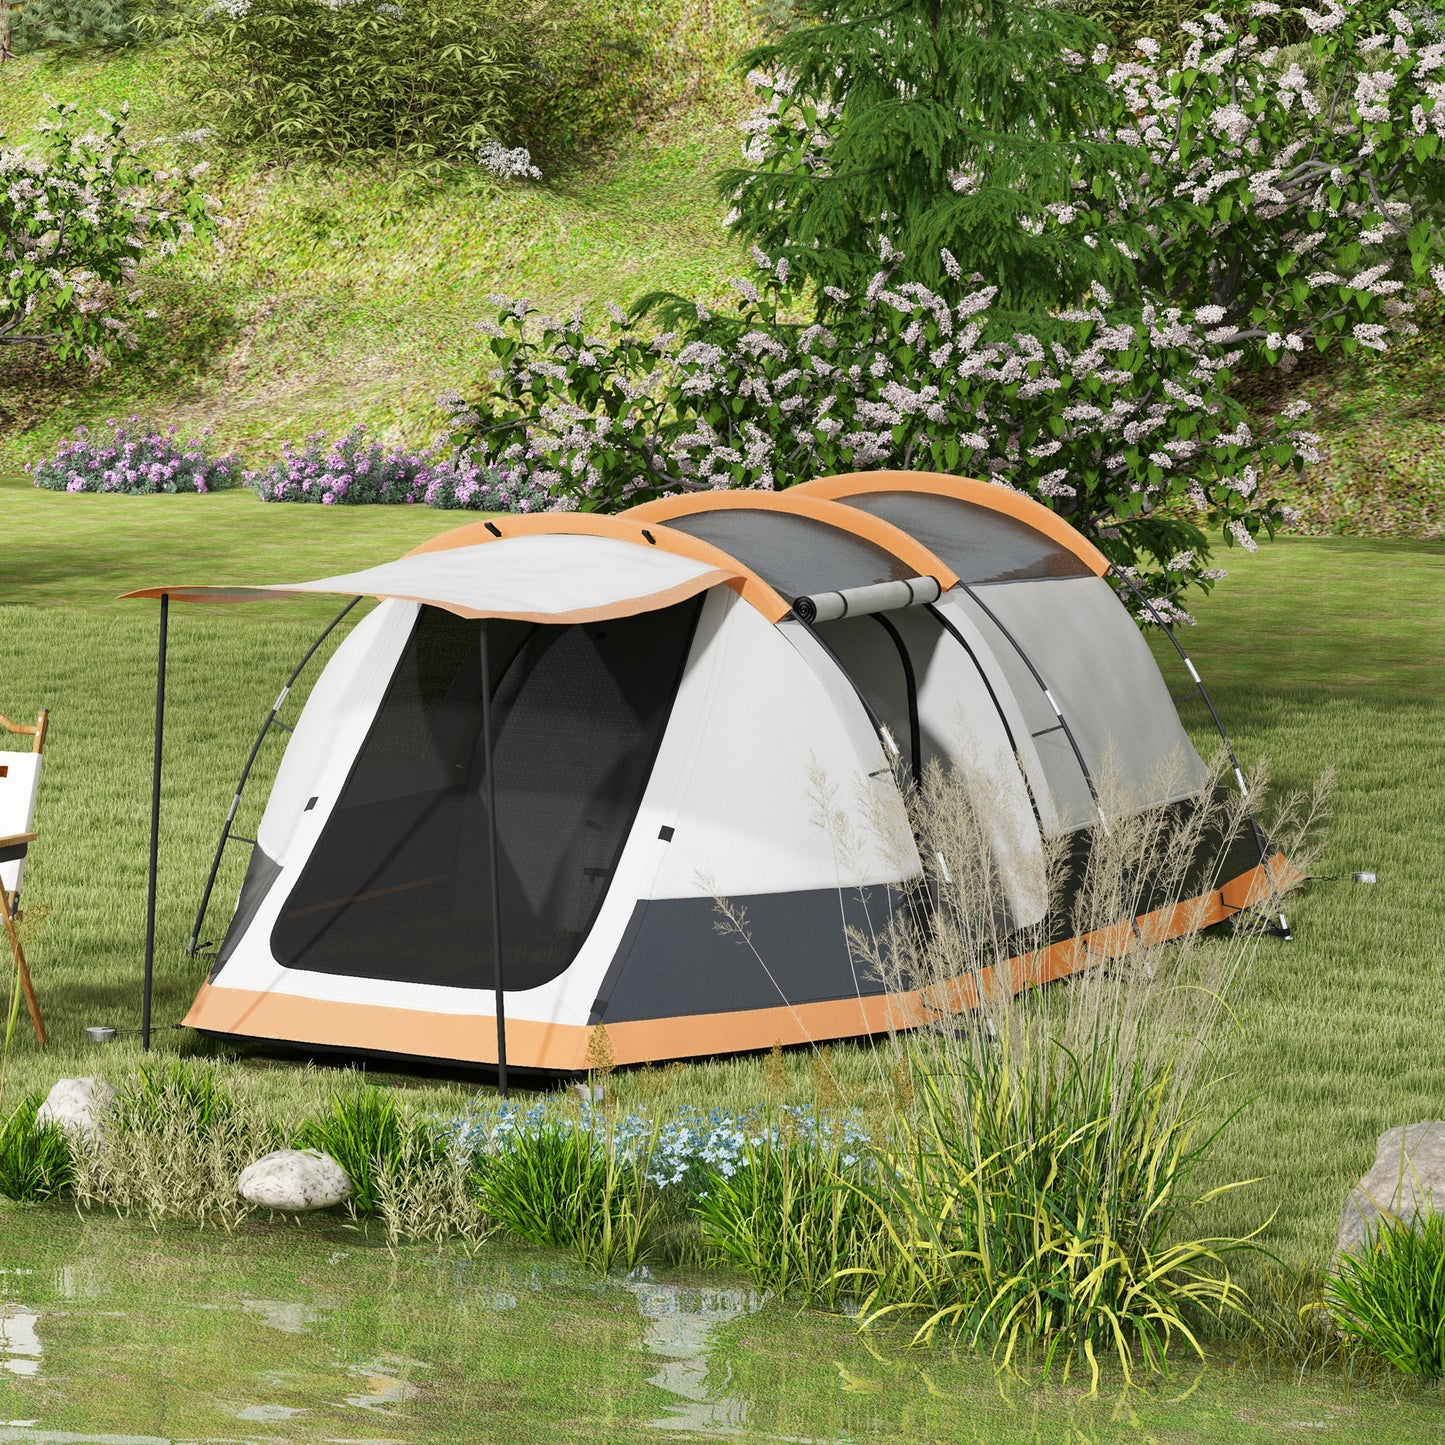 Outsunny 3-4 Man Camping Tent Family Tunnel Tent 2000mm Waterproof Portable with Bag Orange